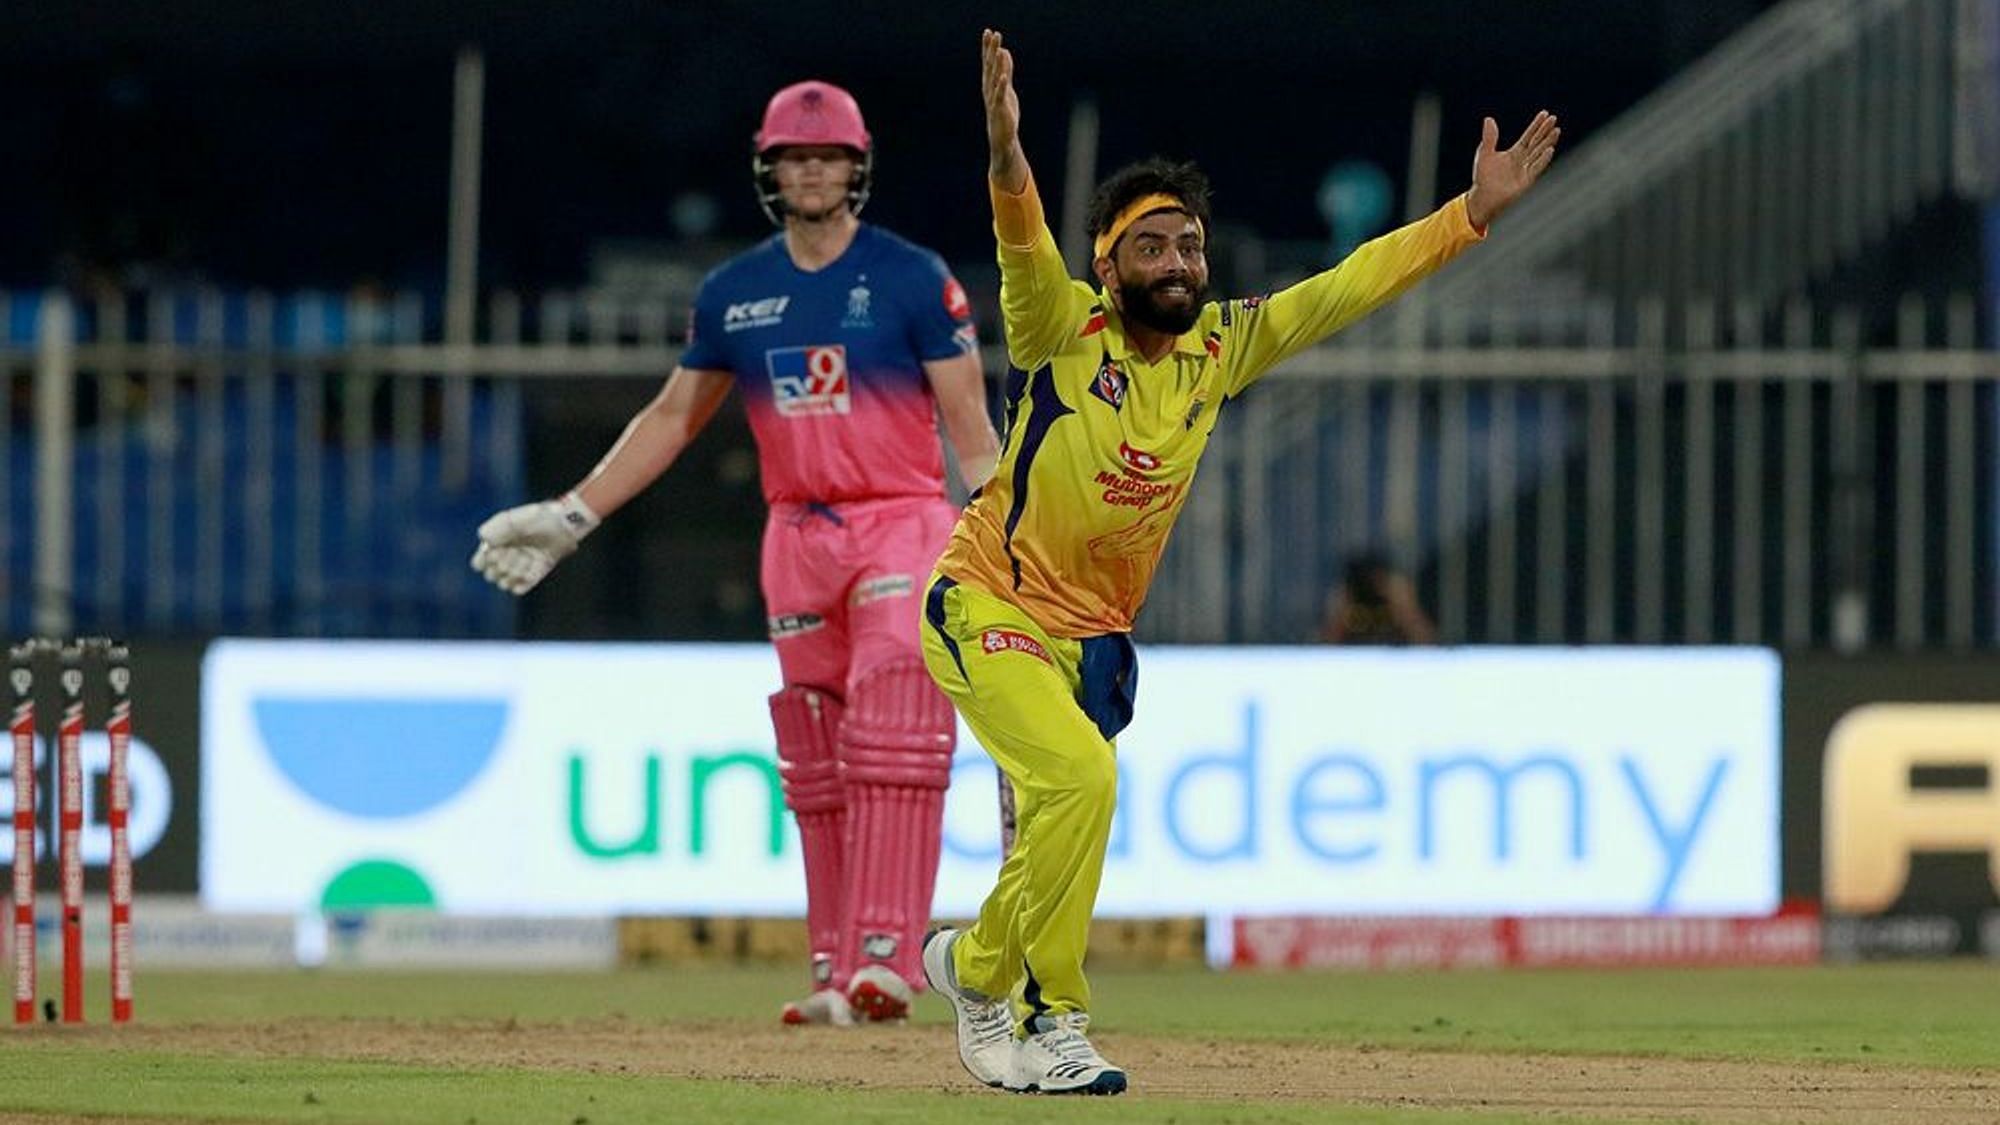 Ravindra Jadeja was pleased to achieve this feat and said it will only push him harder to perform for his team.